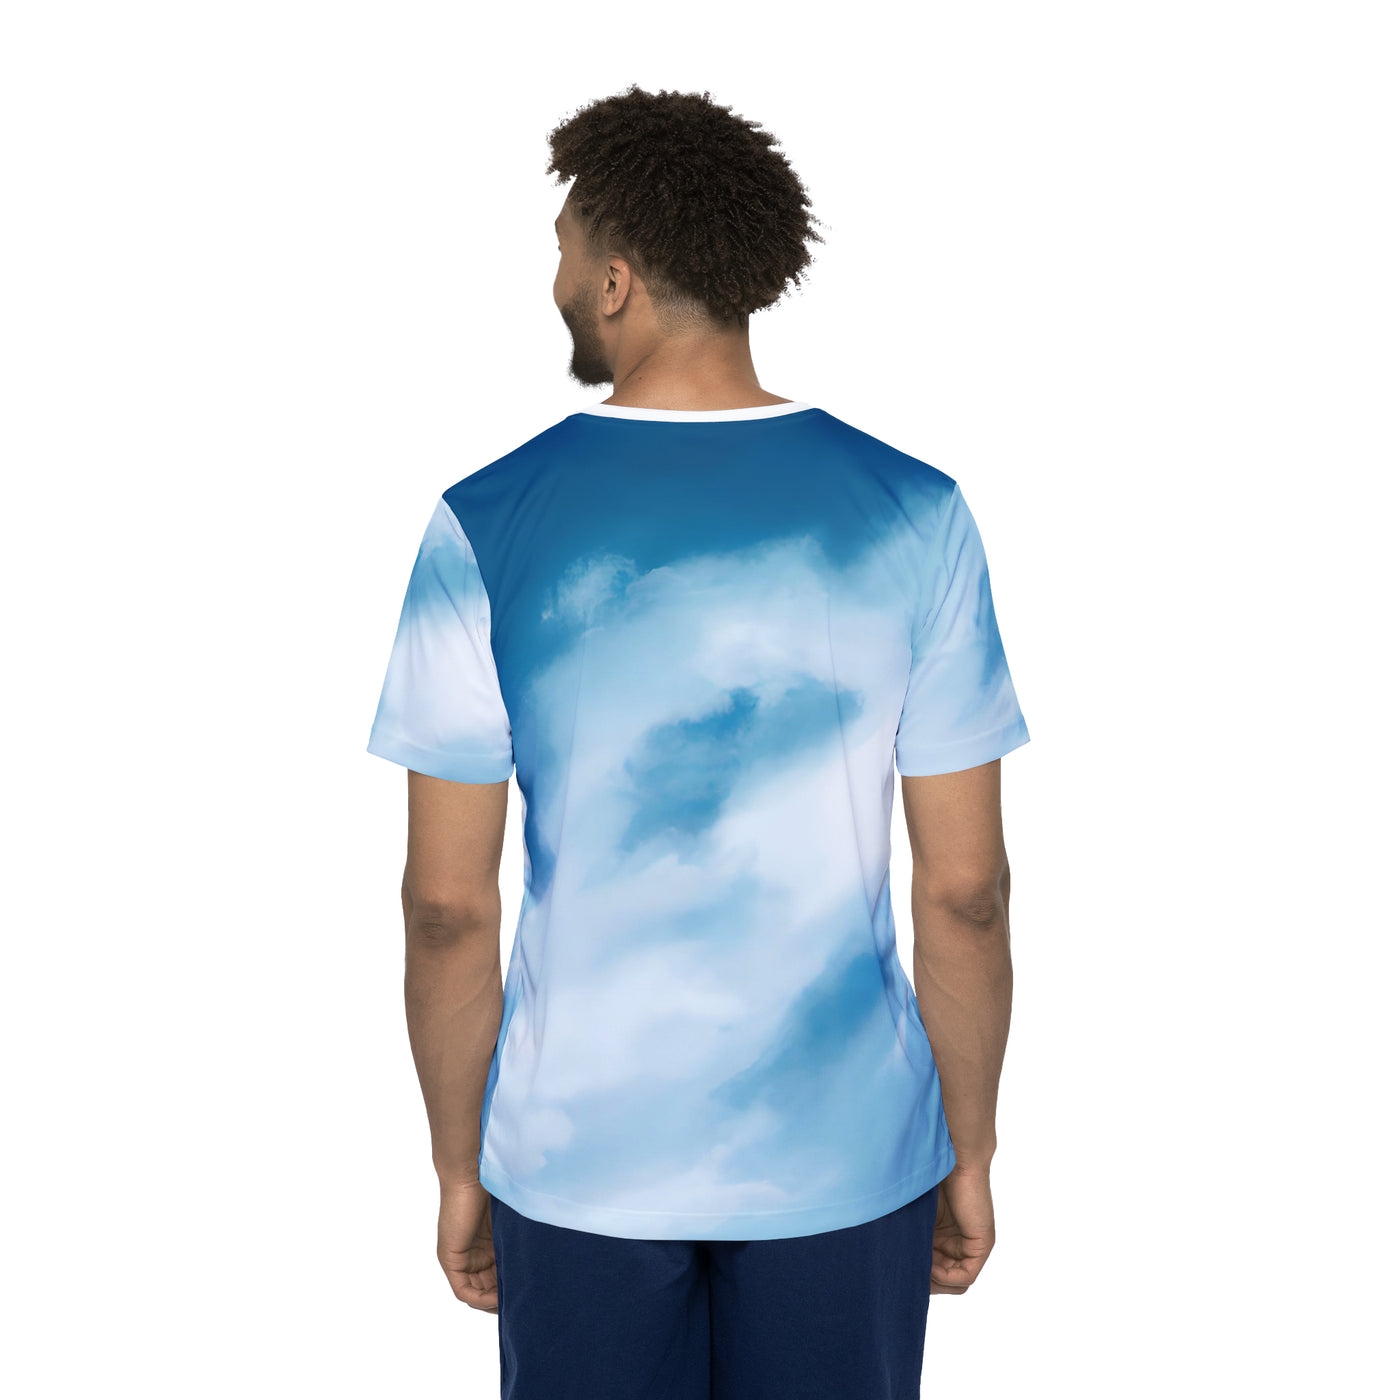 "Amazingly Awesome, Cloudy Skies!" Men's Sports Jersey